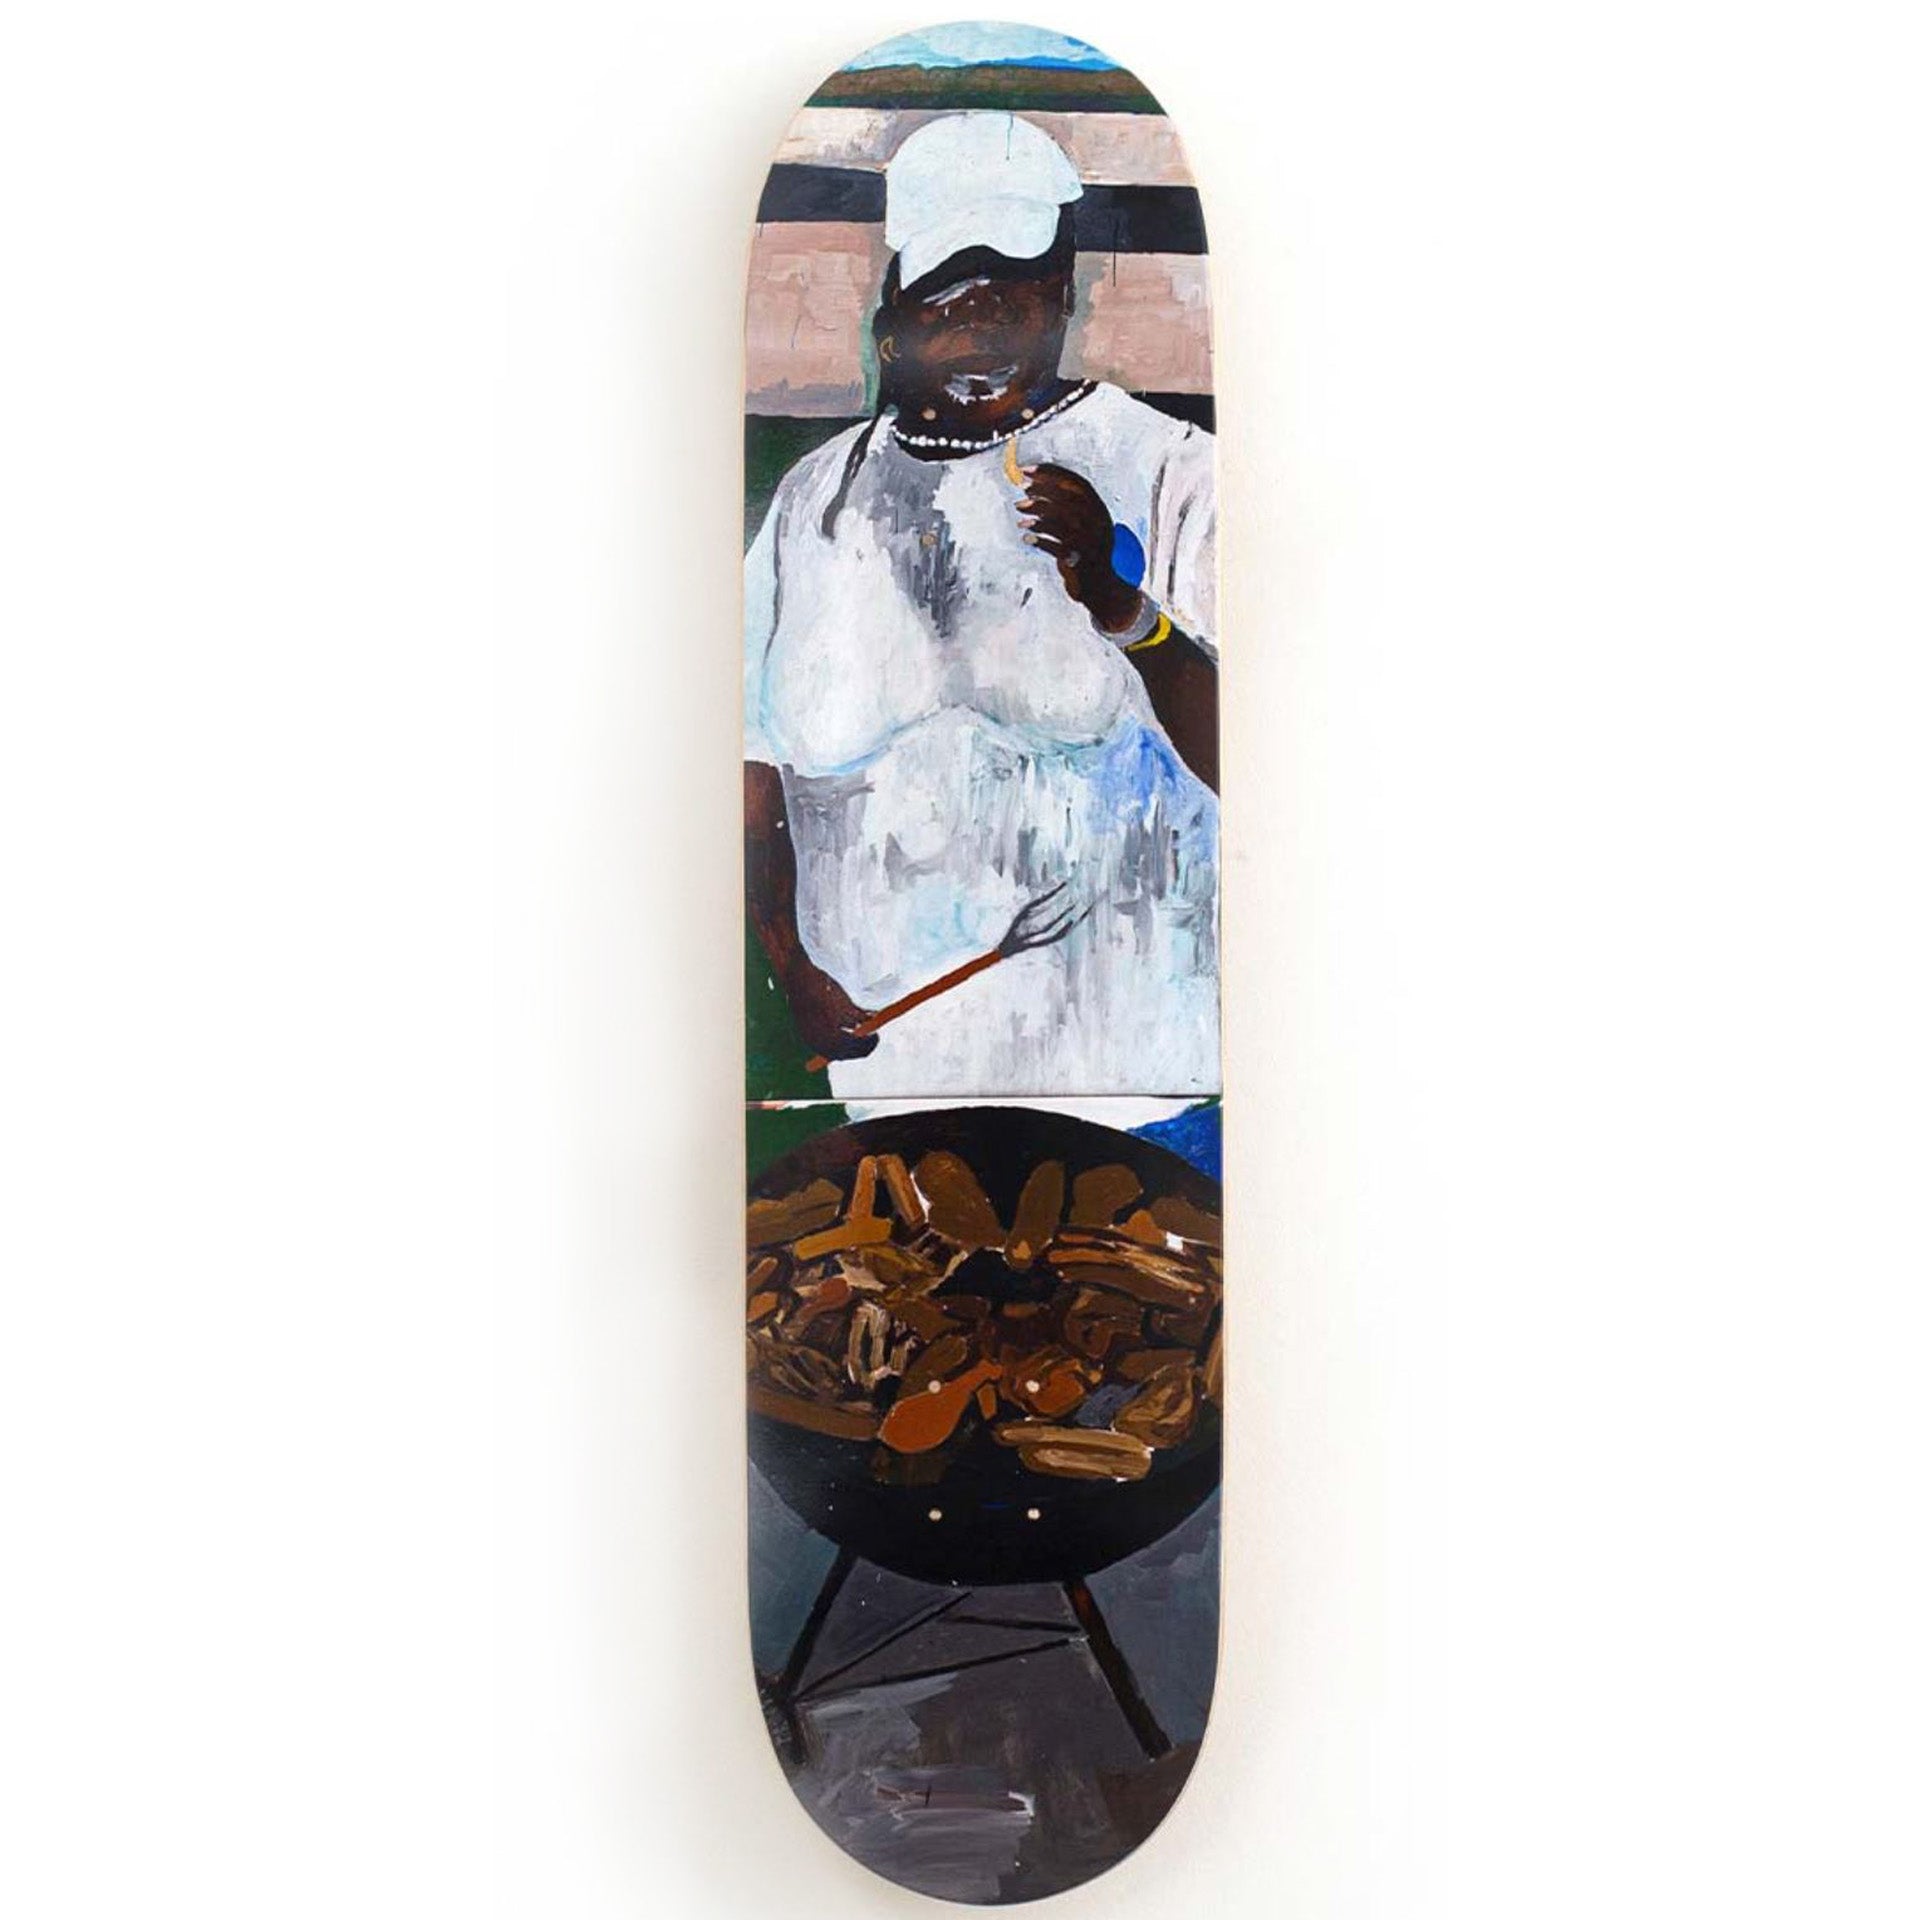 The 4th Skateboard Deck by Henry Taylor